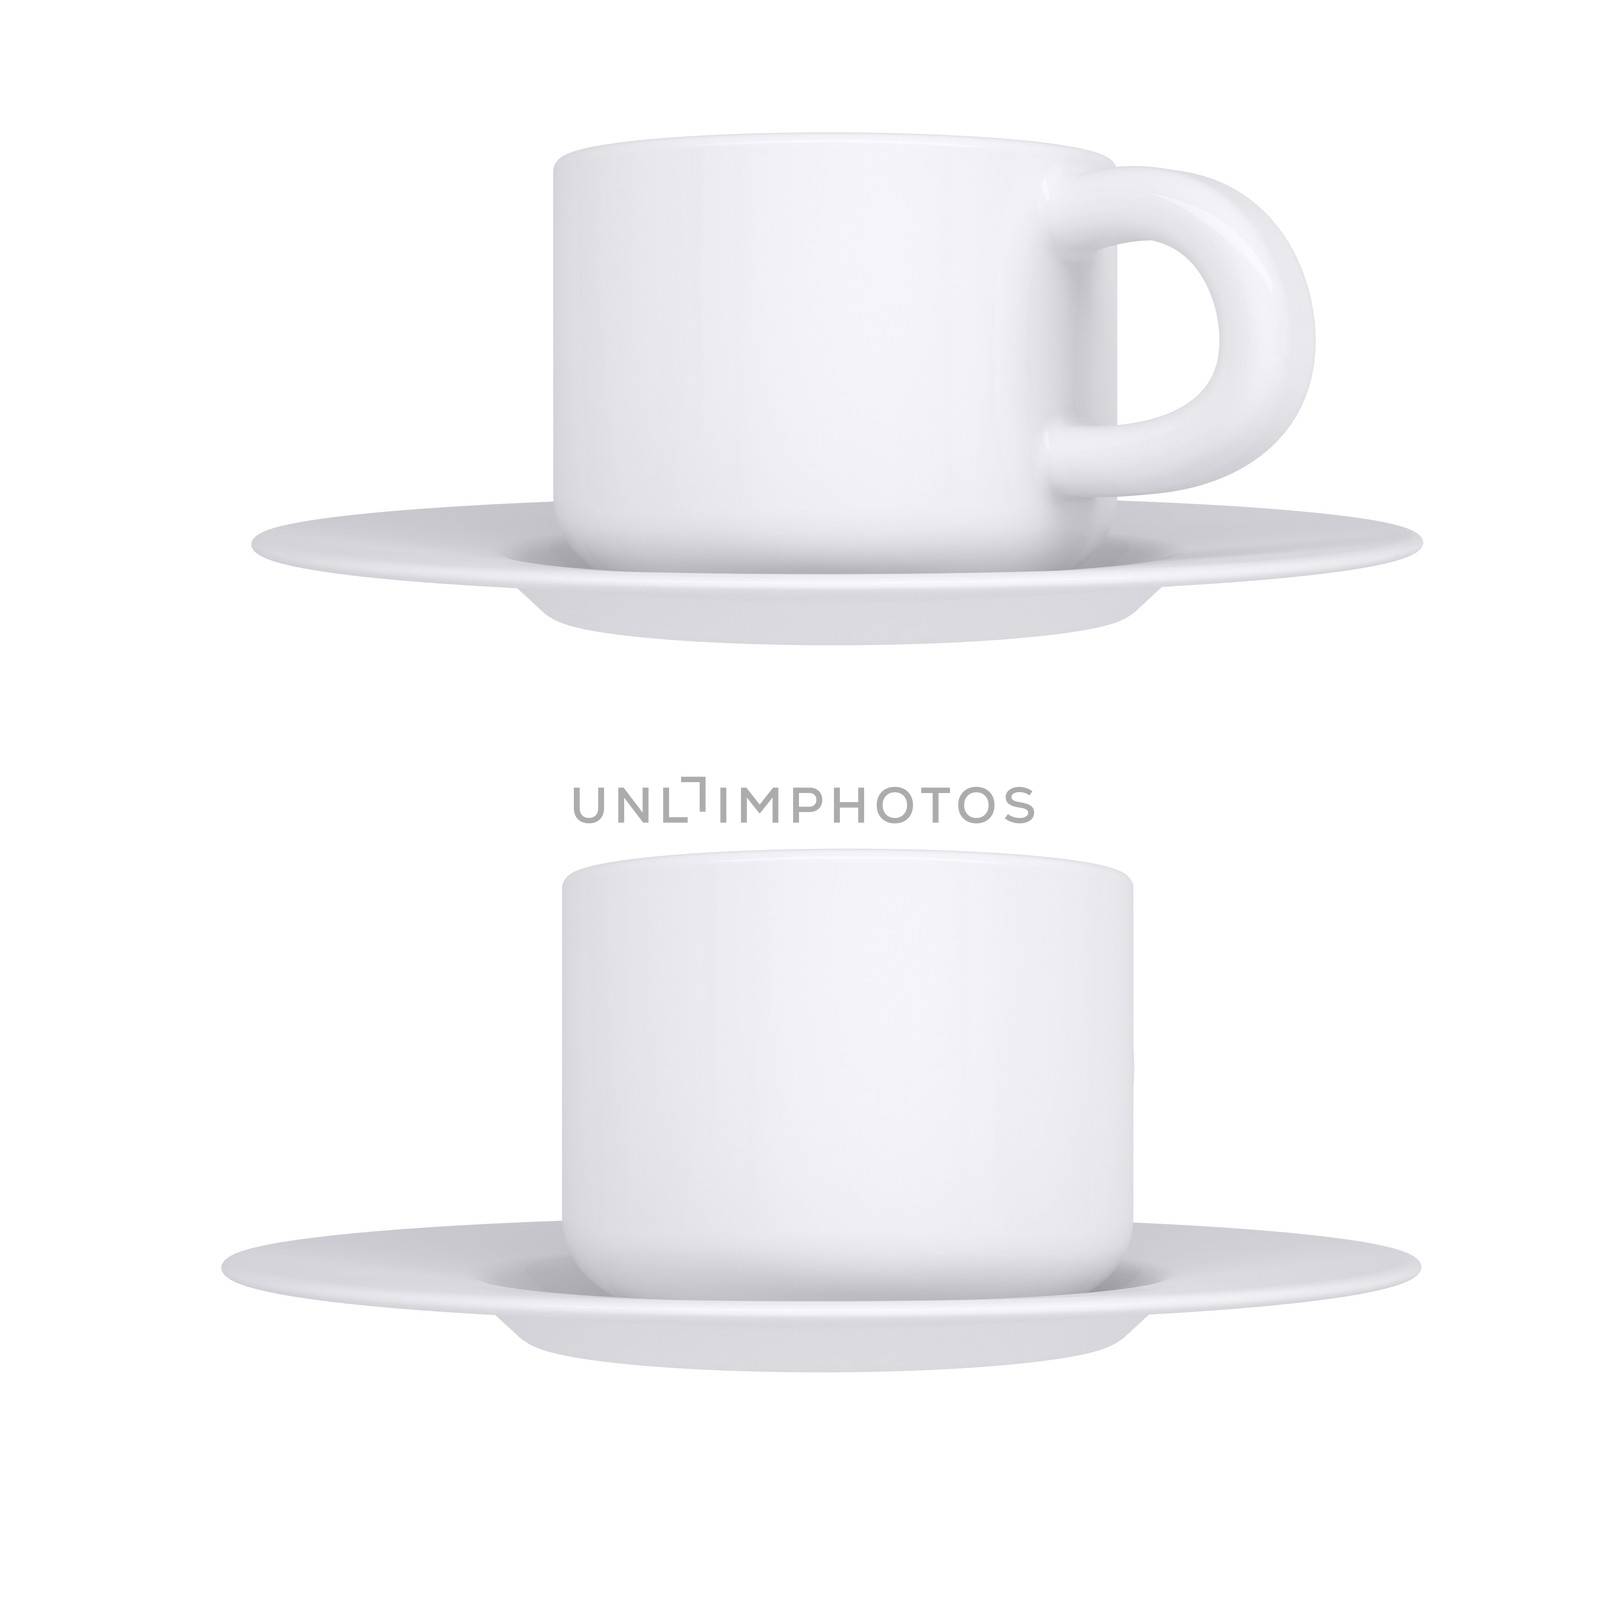 White coffee cup and saucer. Isolated render on a white background